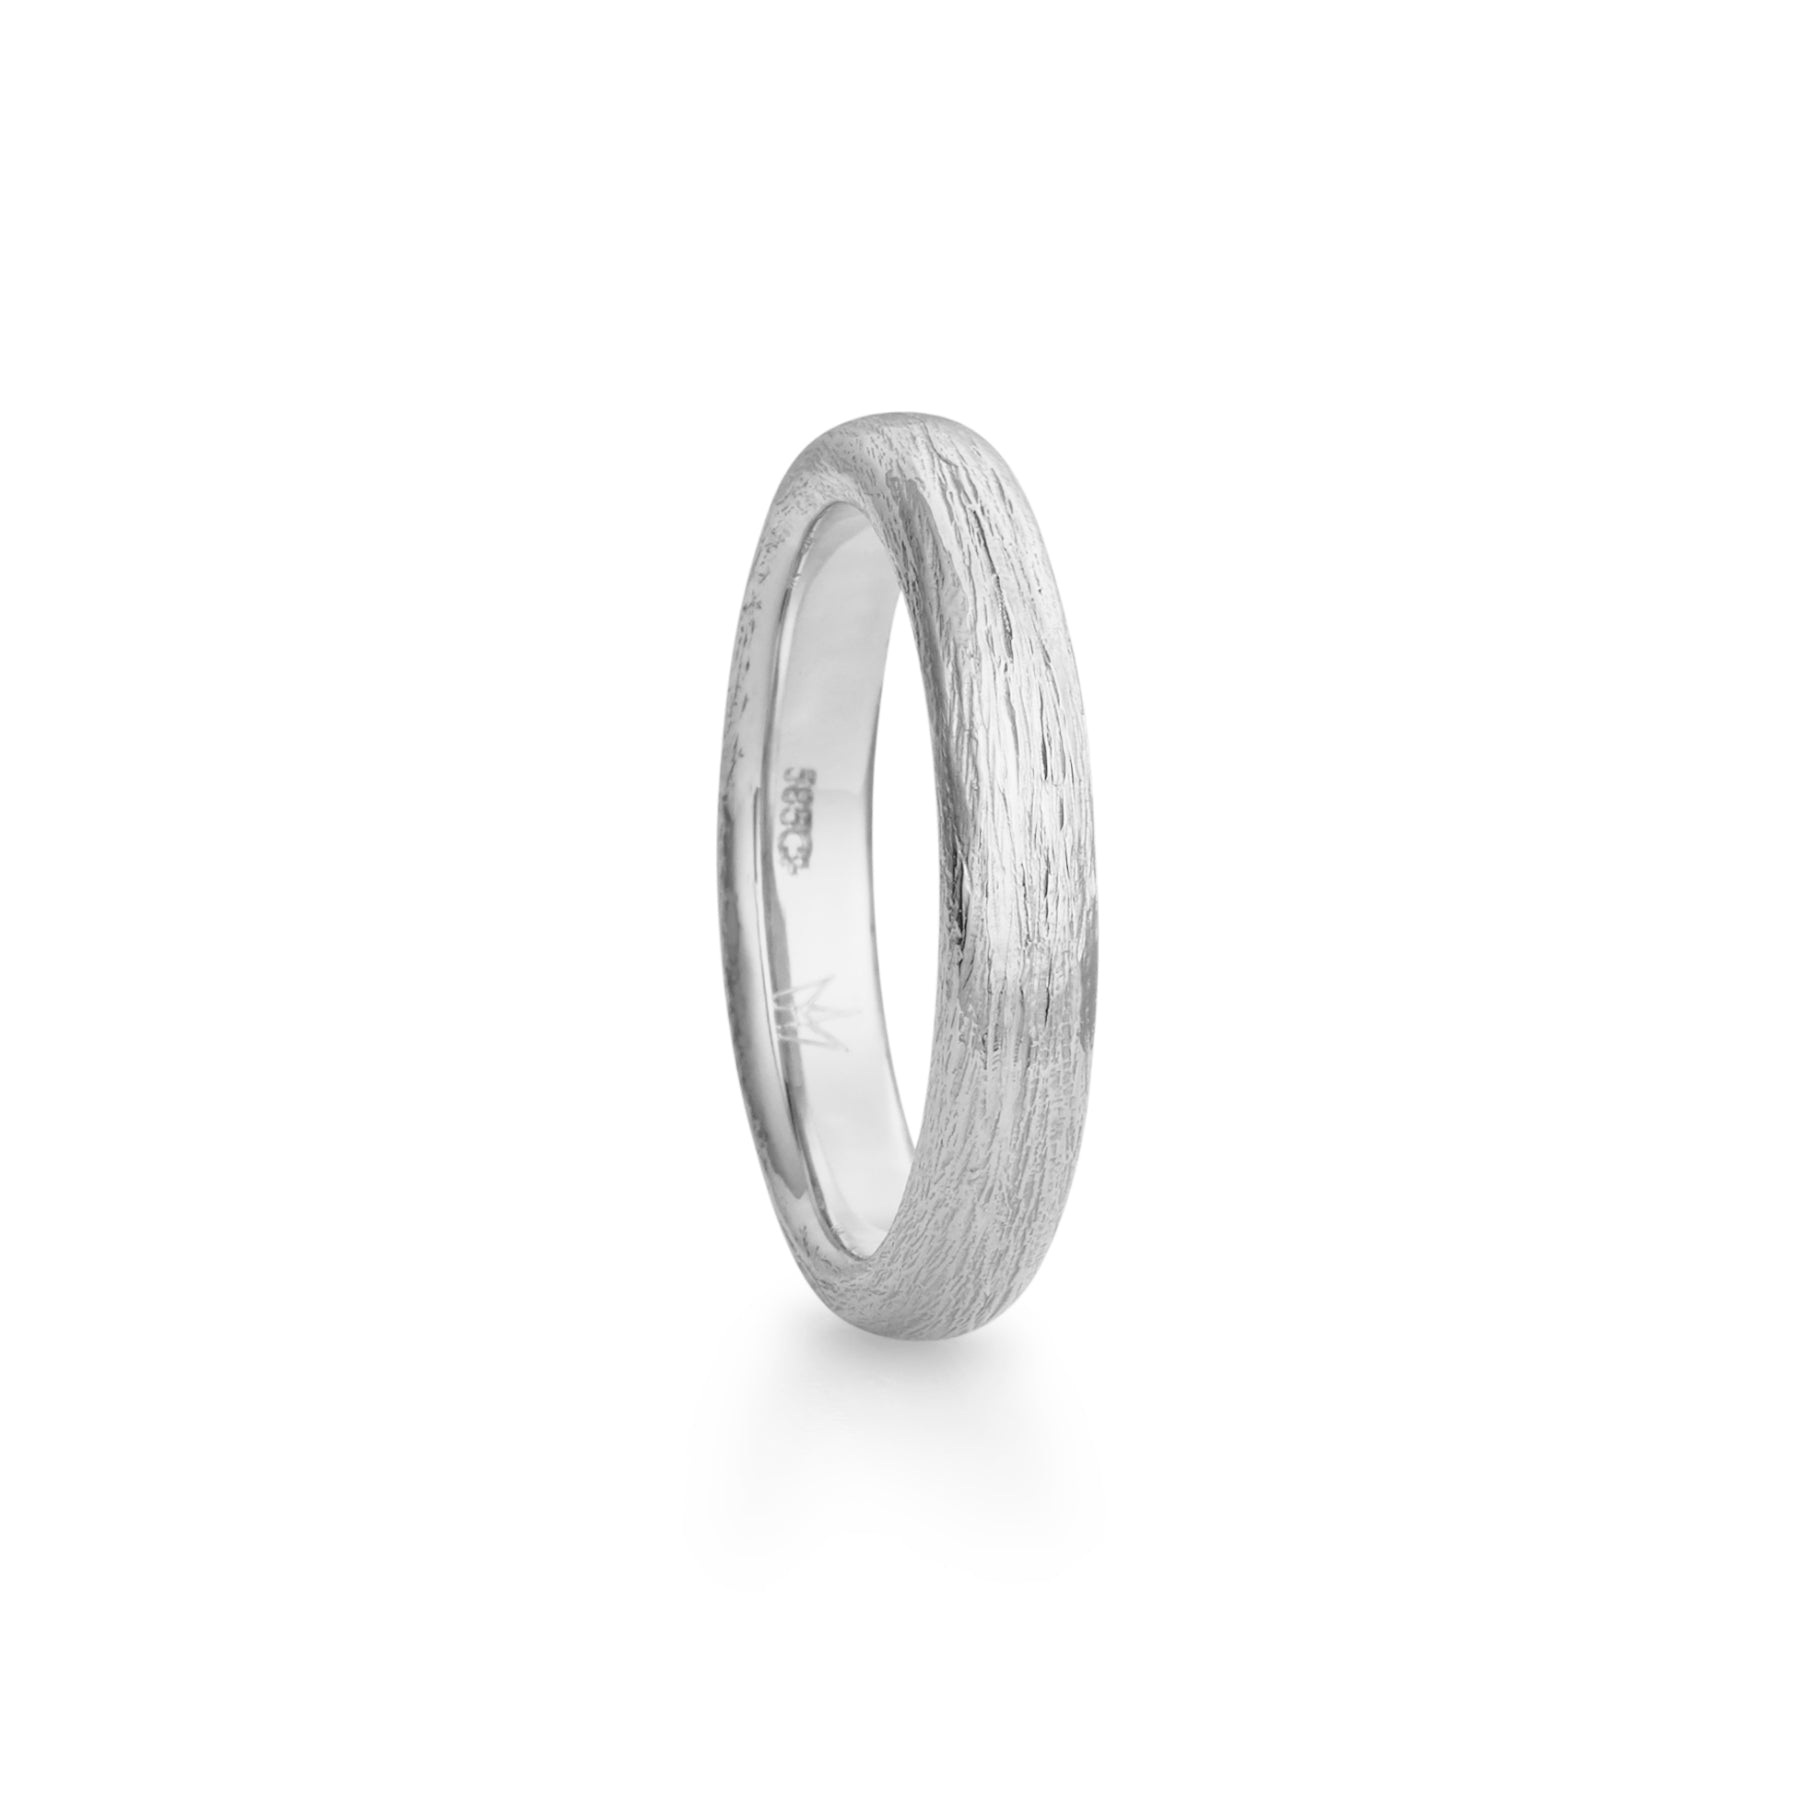 Fossefall ring in white gold, gentleman